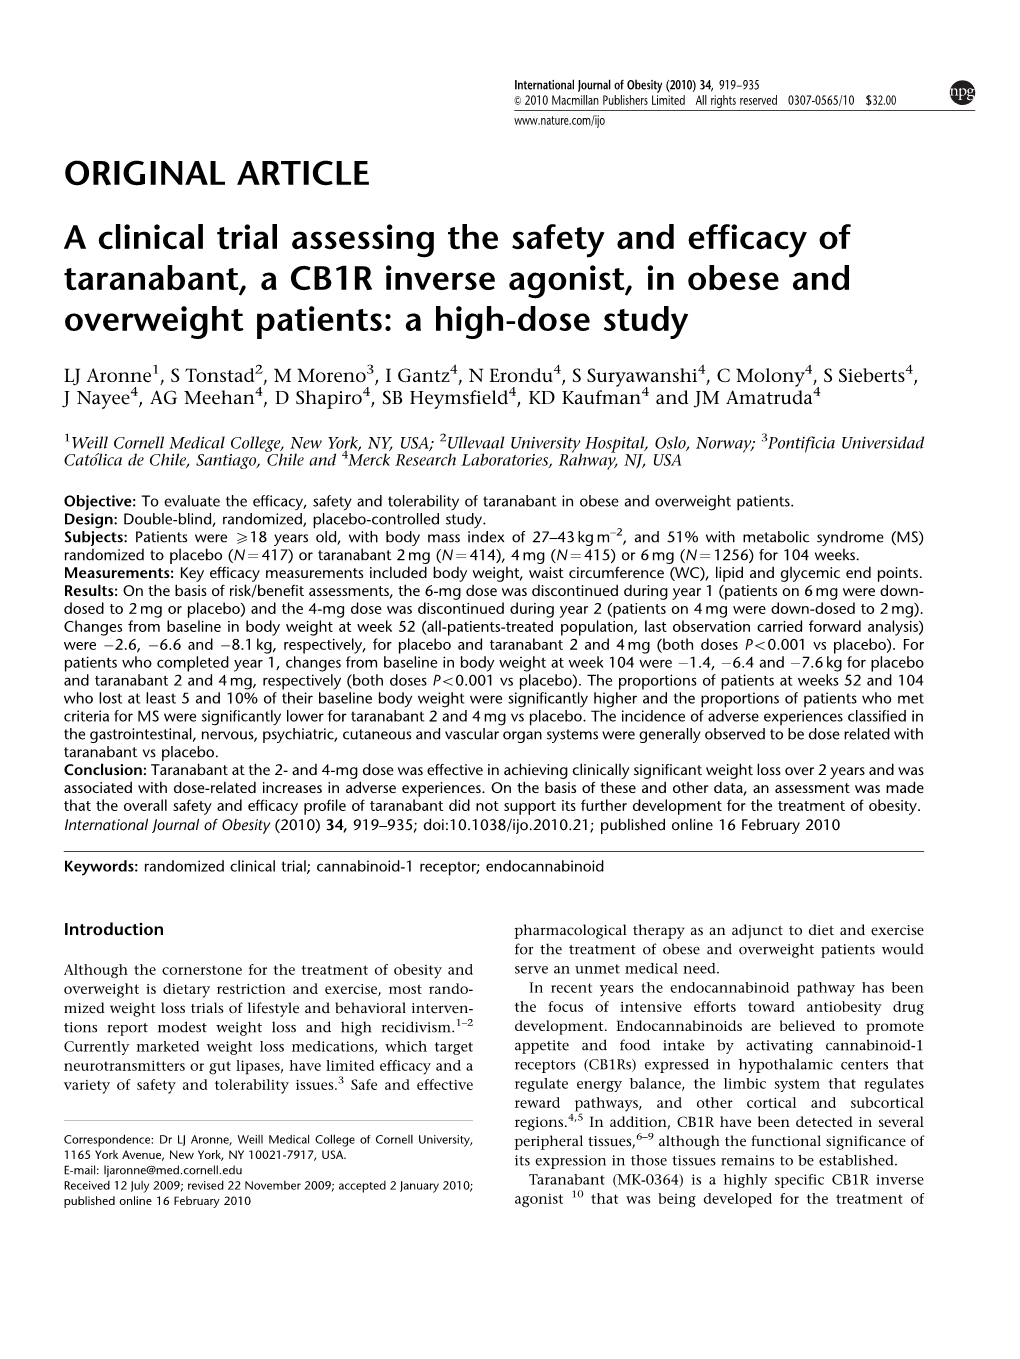 A Clinical Trial Assessing the Safety and Efficacy of Taranabant, a CB1R Inverse Agonist, in Obese and Overweight Patients: a High-Dose Study